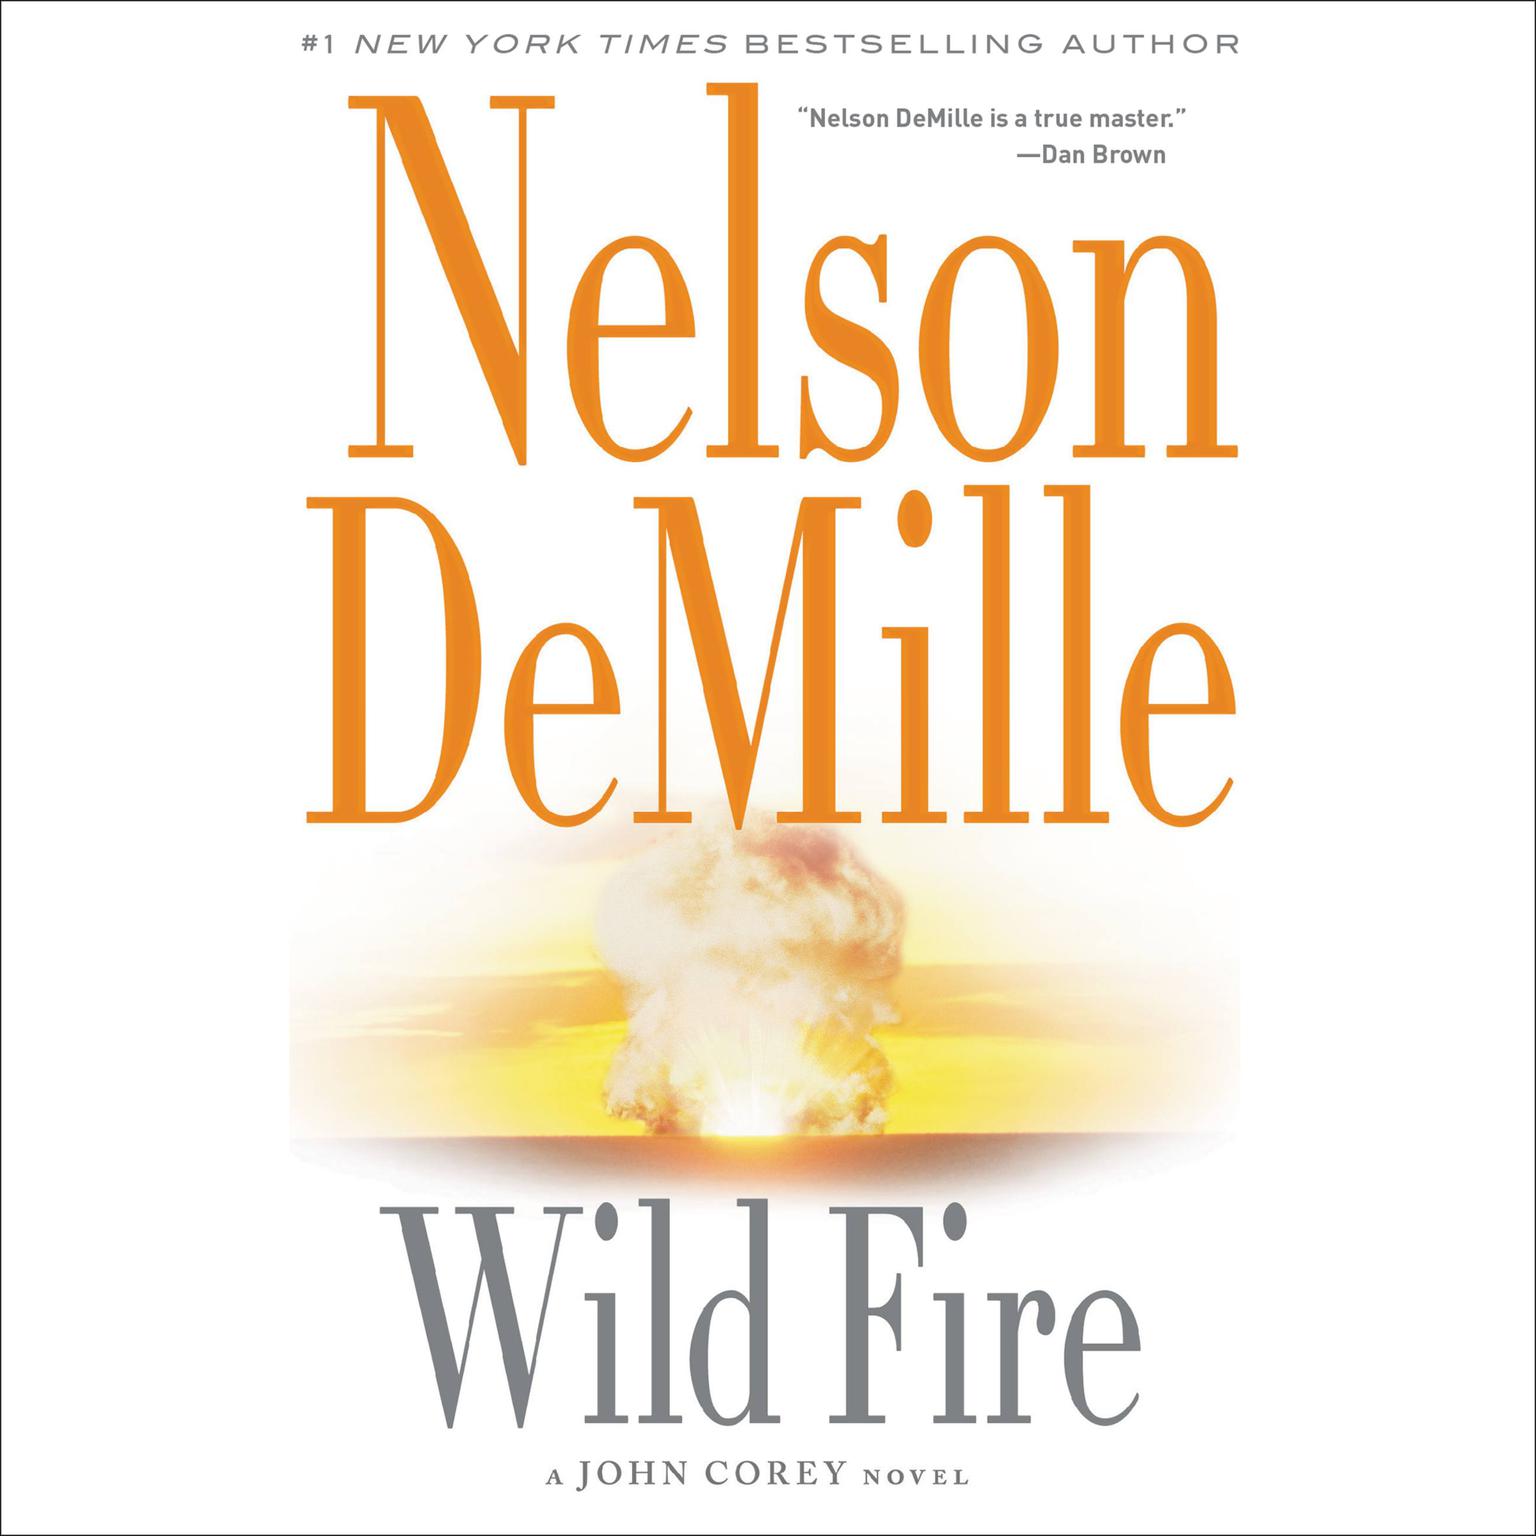 Wild Fire Audiobook, by Nelson DeMille